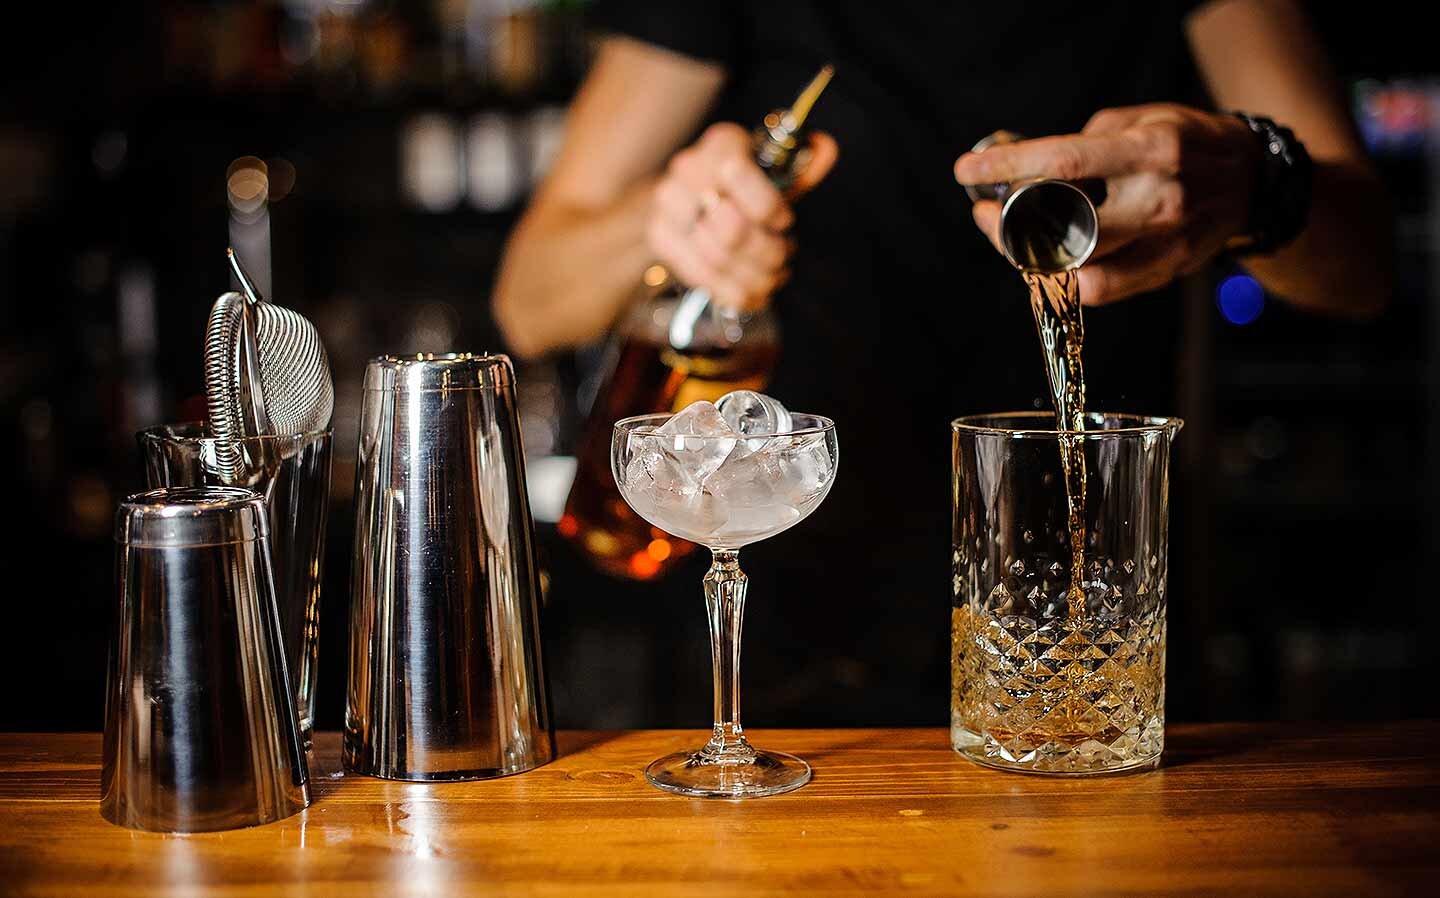 Mixology 101 Cocktail Making | $40 AUD per person